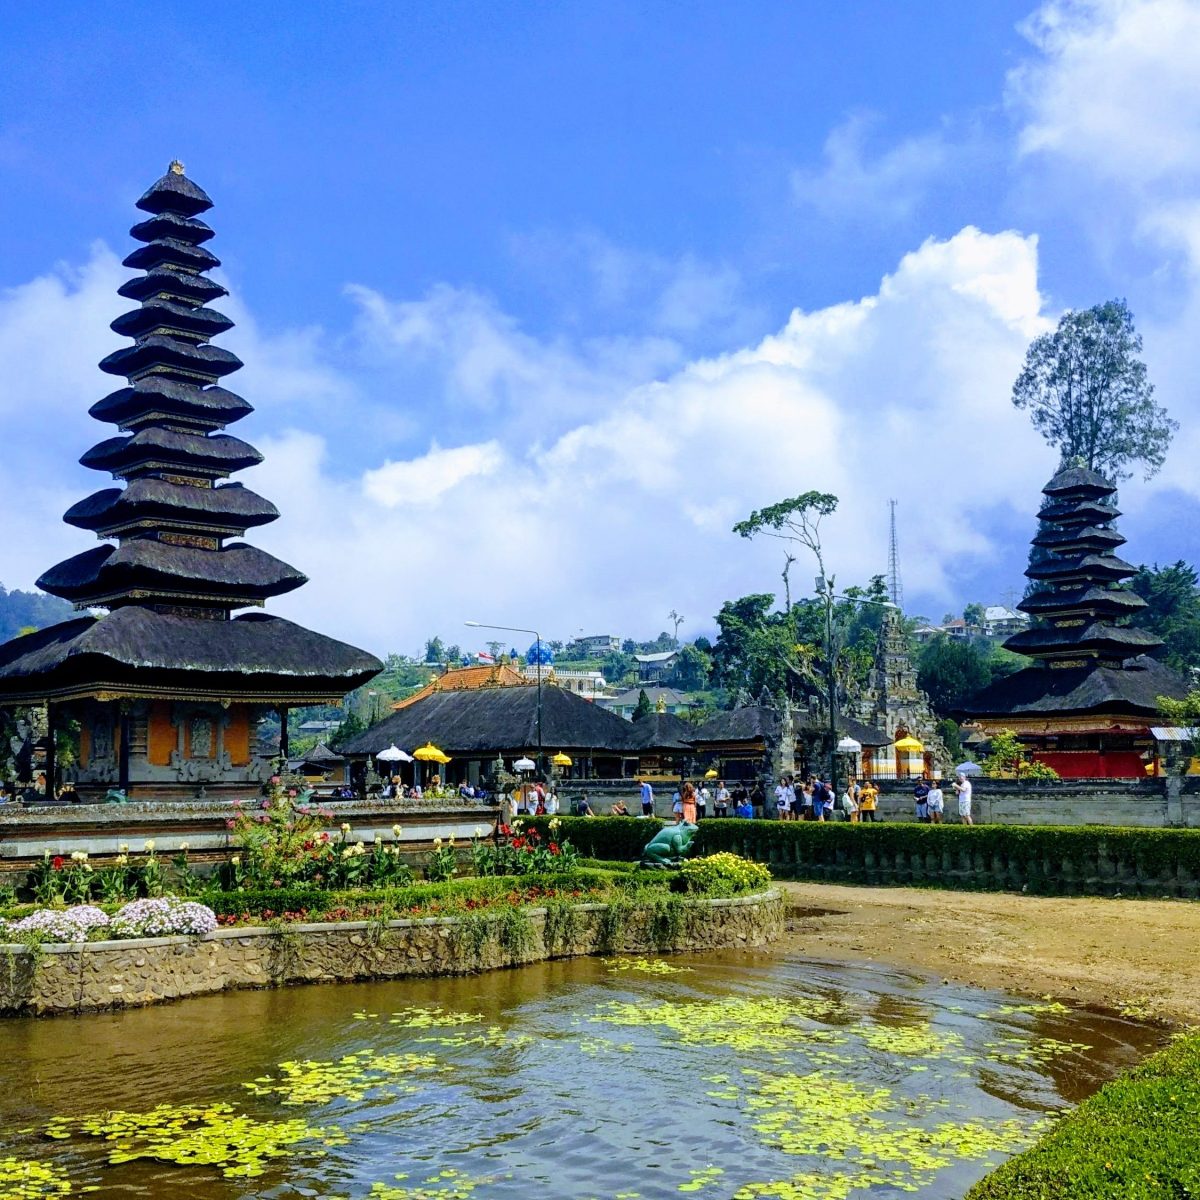 10 Tips for Planning a Trip to Bali or Indonesia